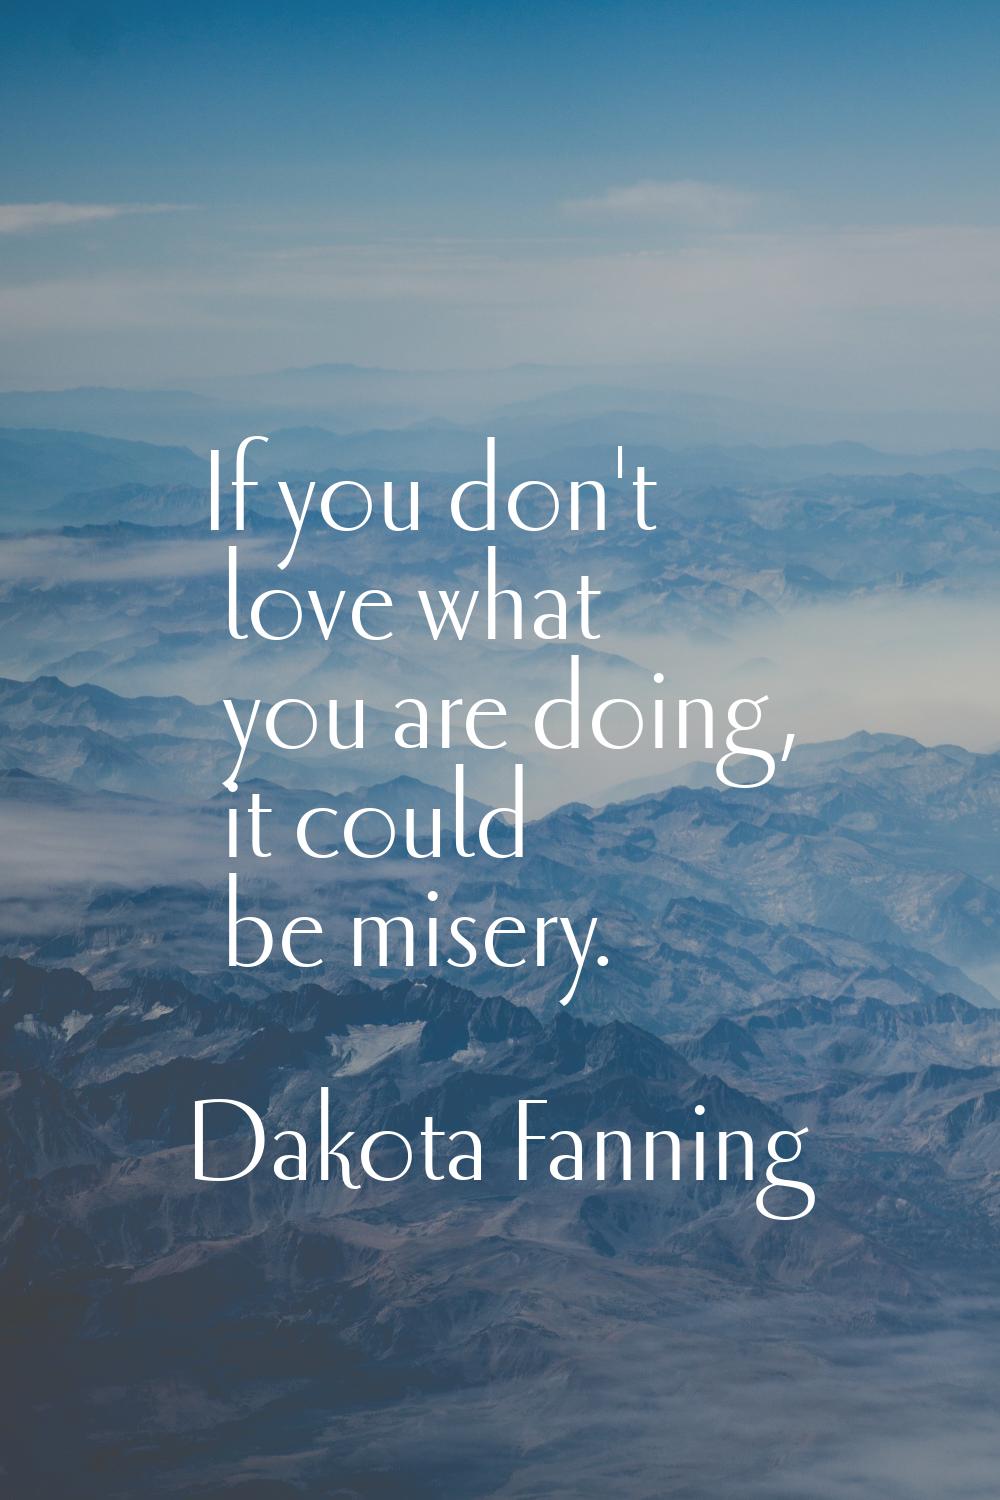 If you don't love what you are doing, it could be misery.